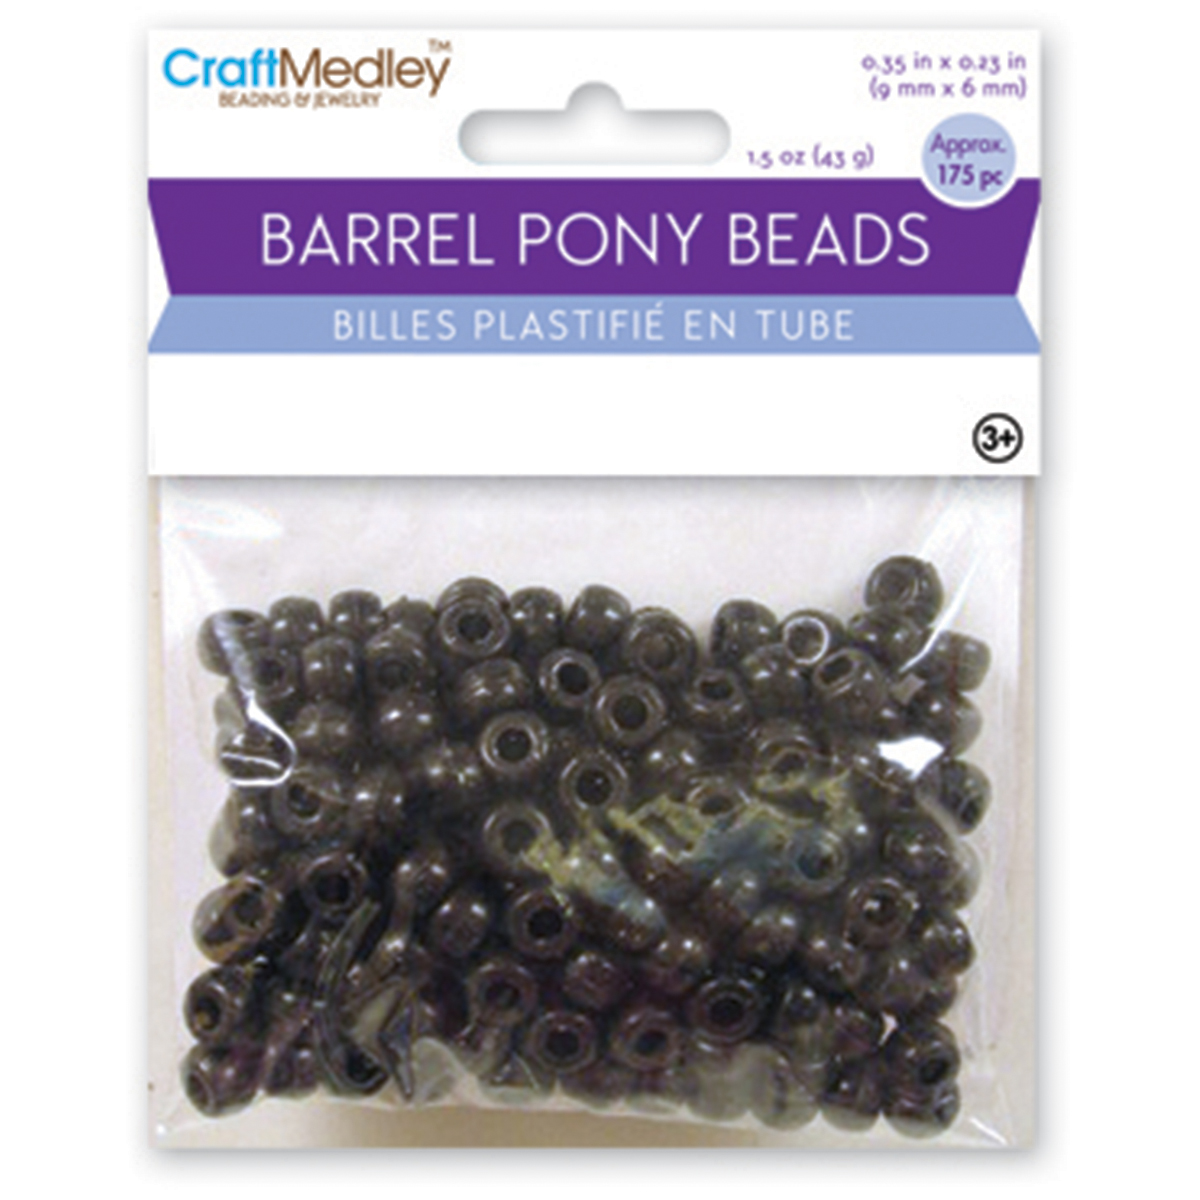 Craft Medley Barrel Pony Beads - Black, Package of 175 - image 2 of 2